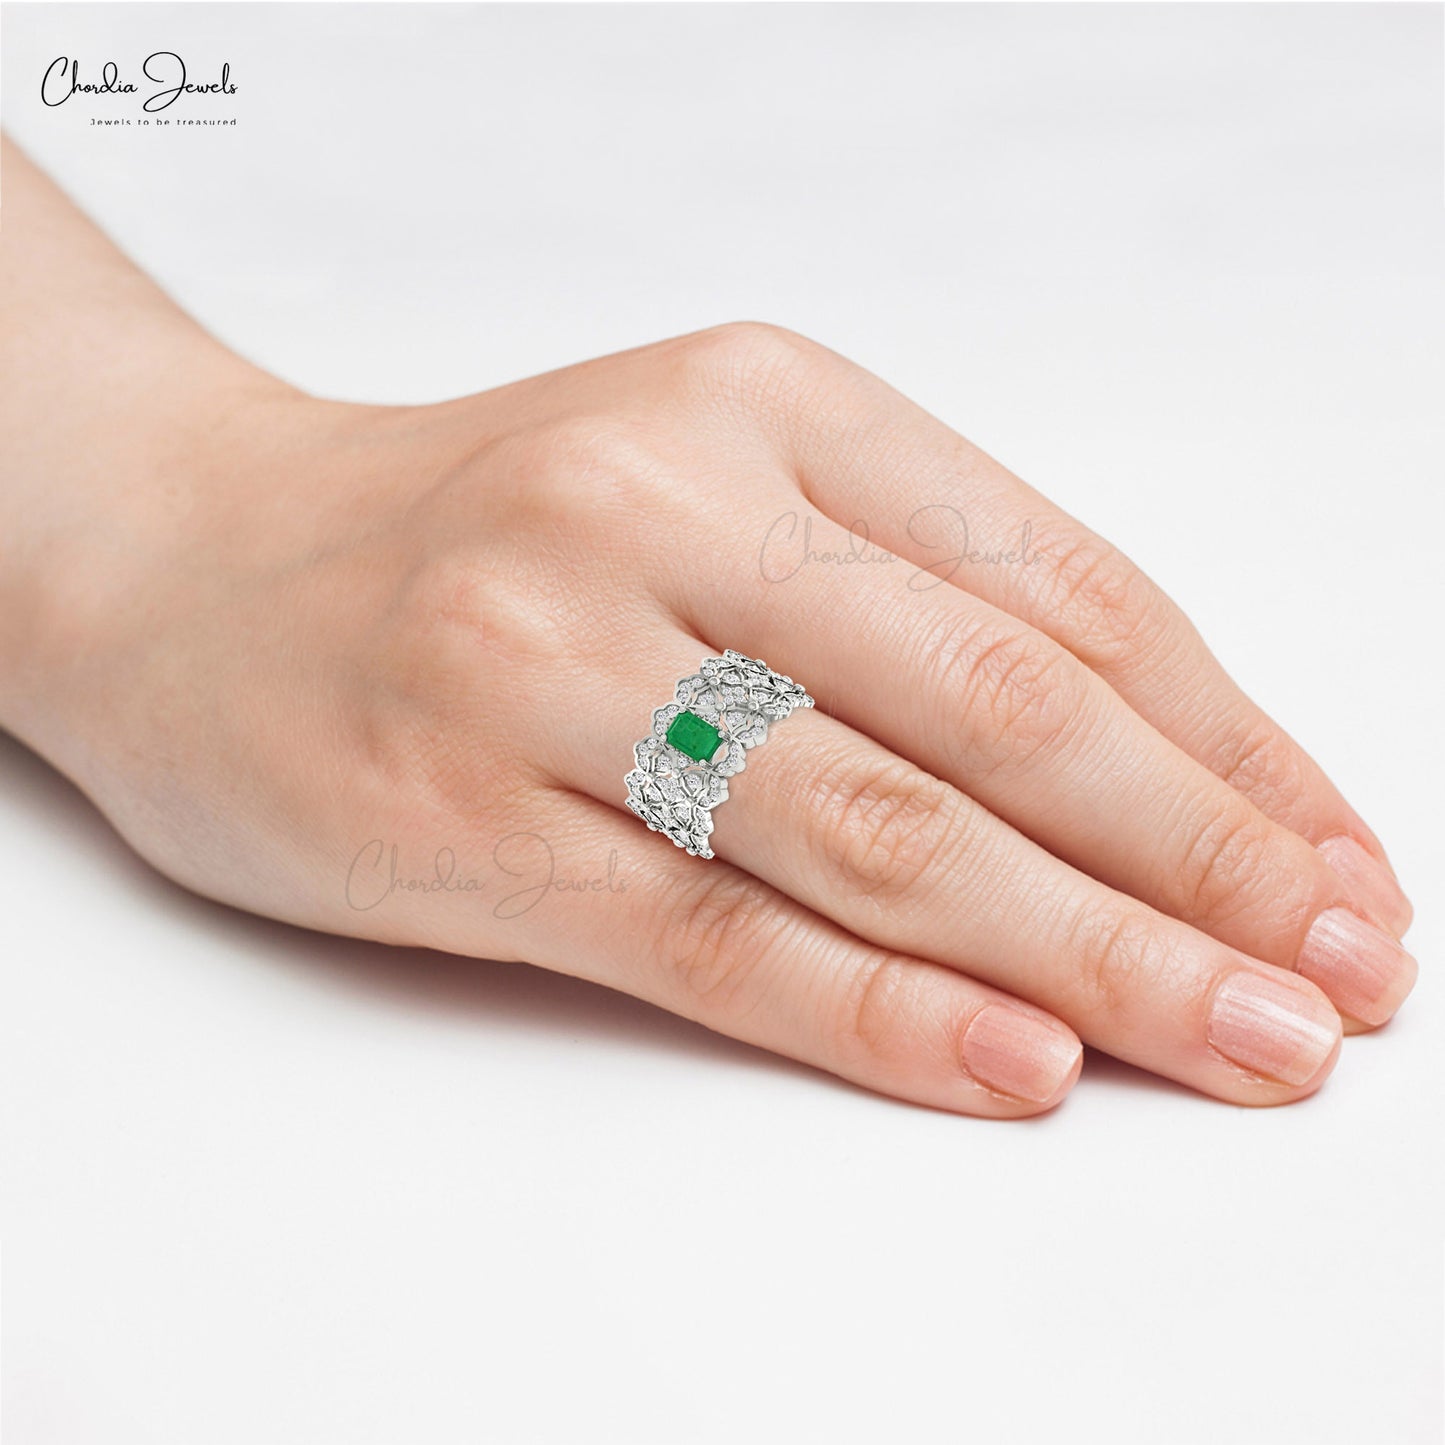 Indulge in the luxury of our emerald and diamond ring.